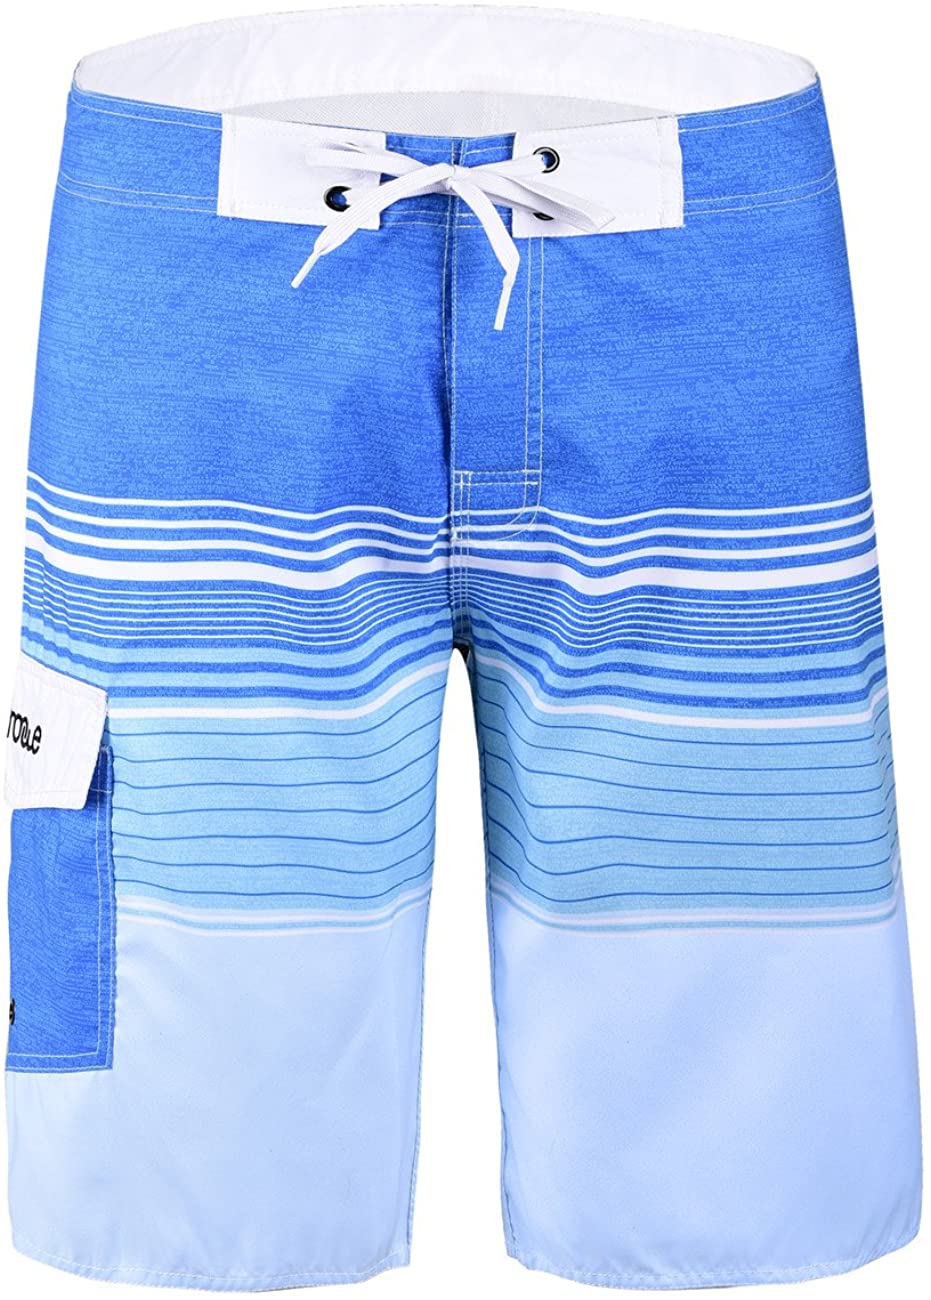 Nonwe Men's Quick Dry Wave Pattern with Mesh Lining Board Shorts 